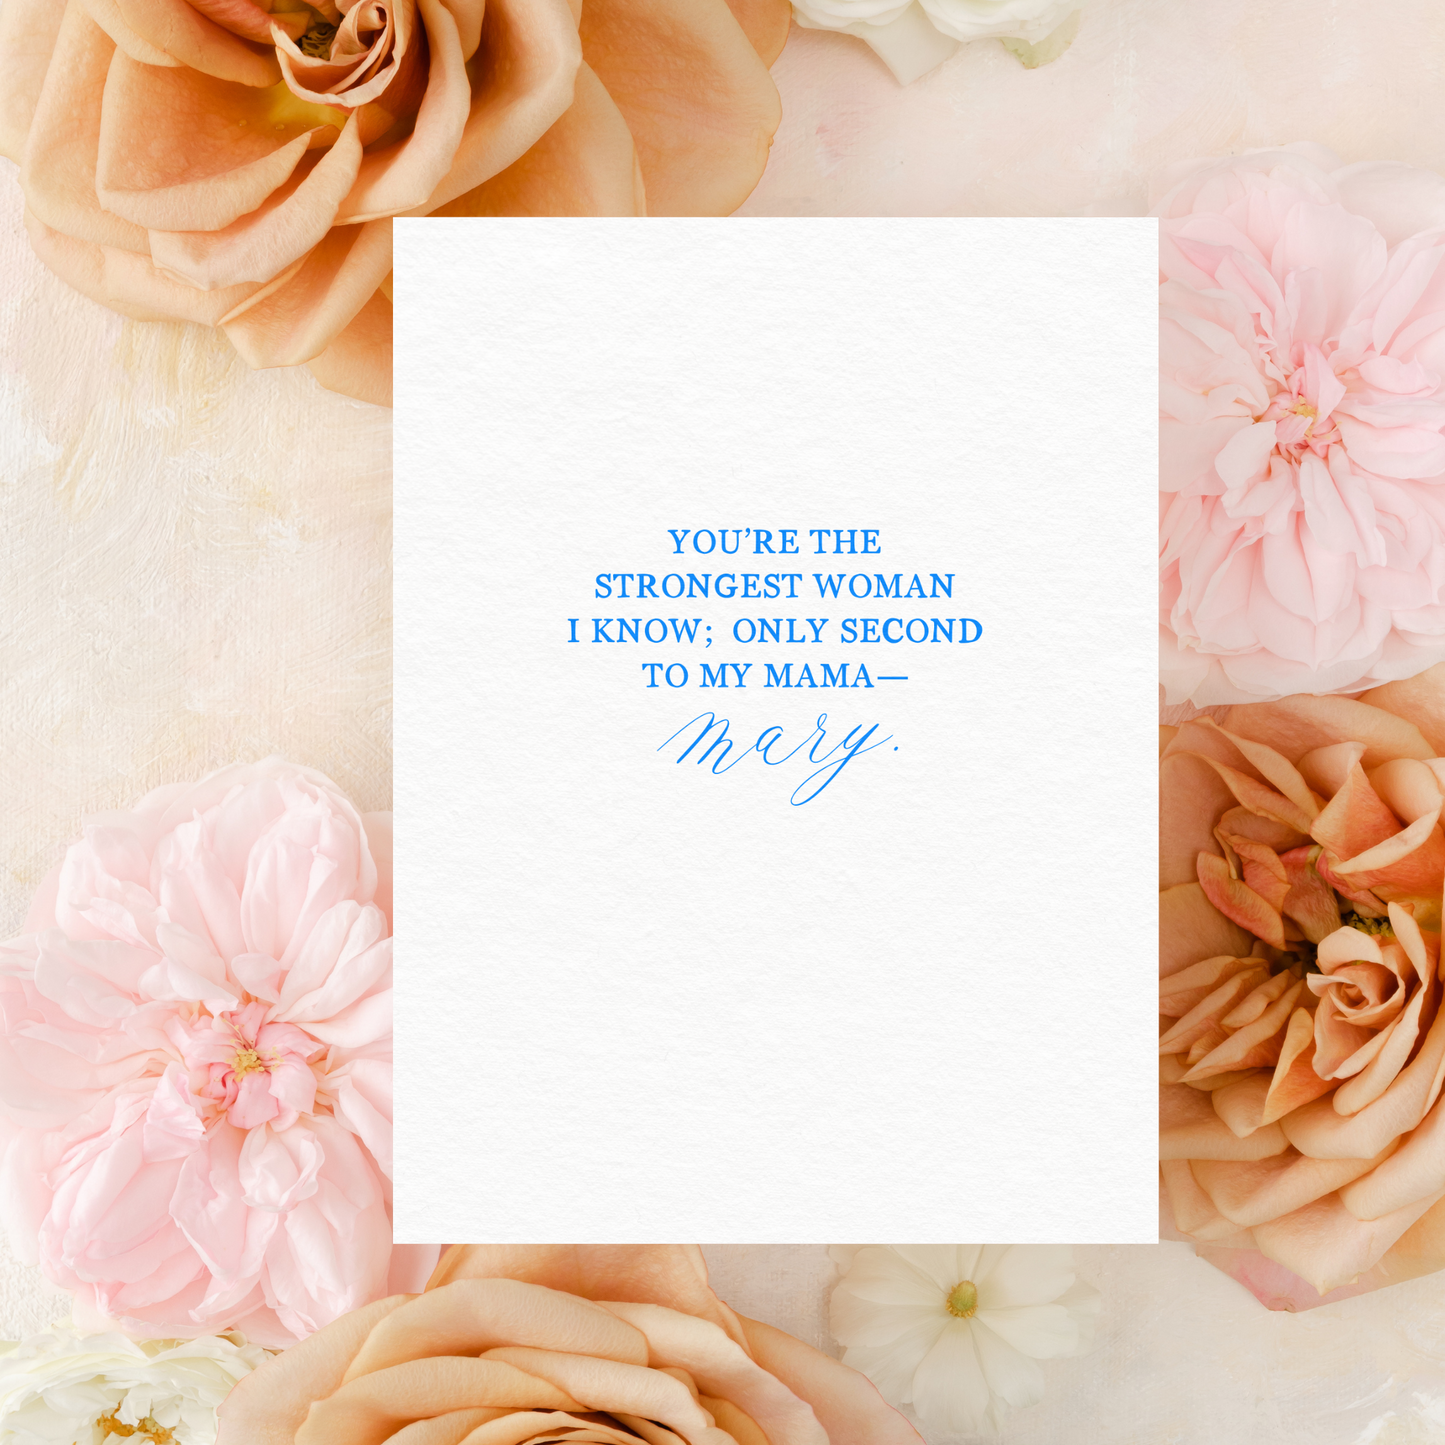 Catholic Valentine's Day Greeting Card, "You're the Strongest Woman I Know"